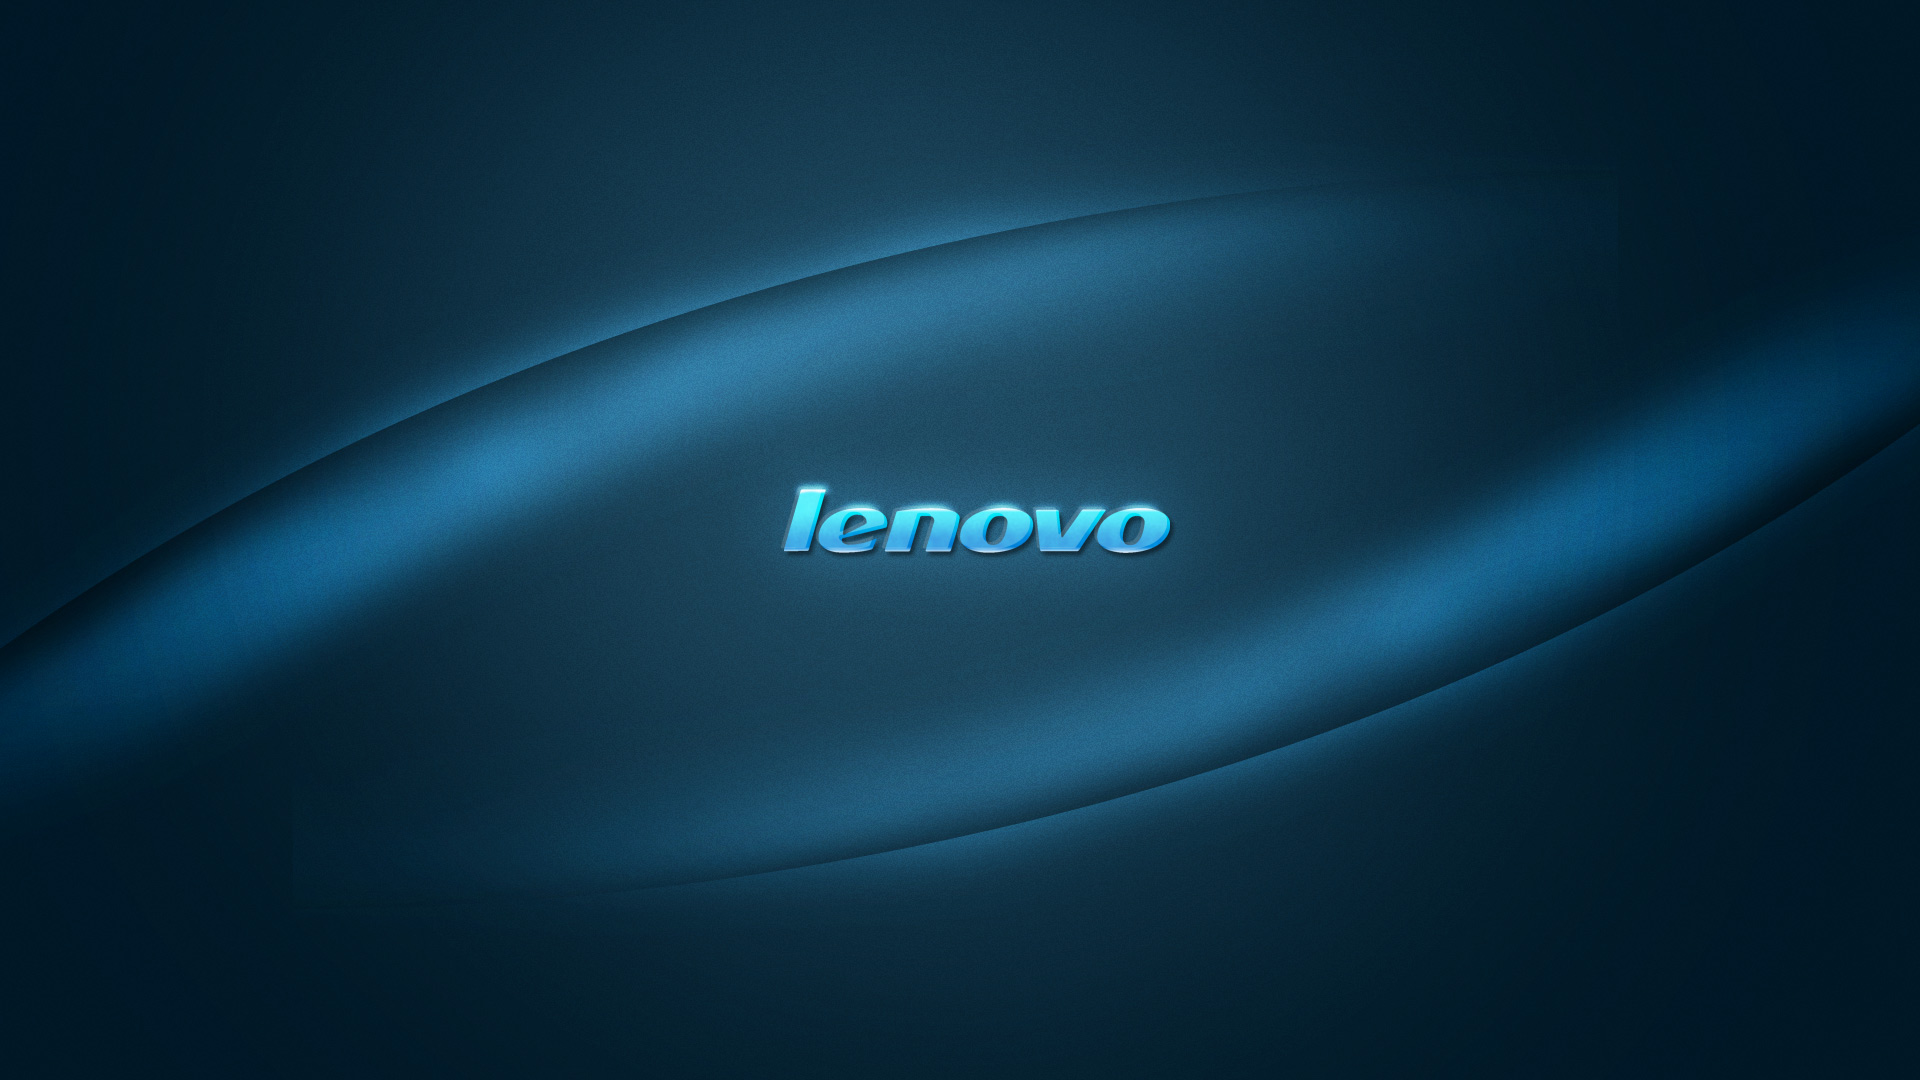 Lenovo Wallpaper Collection In HD For